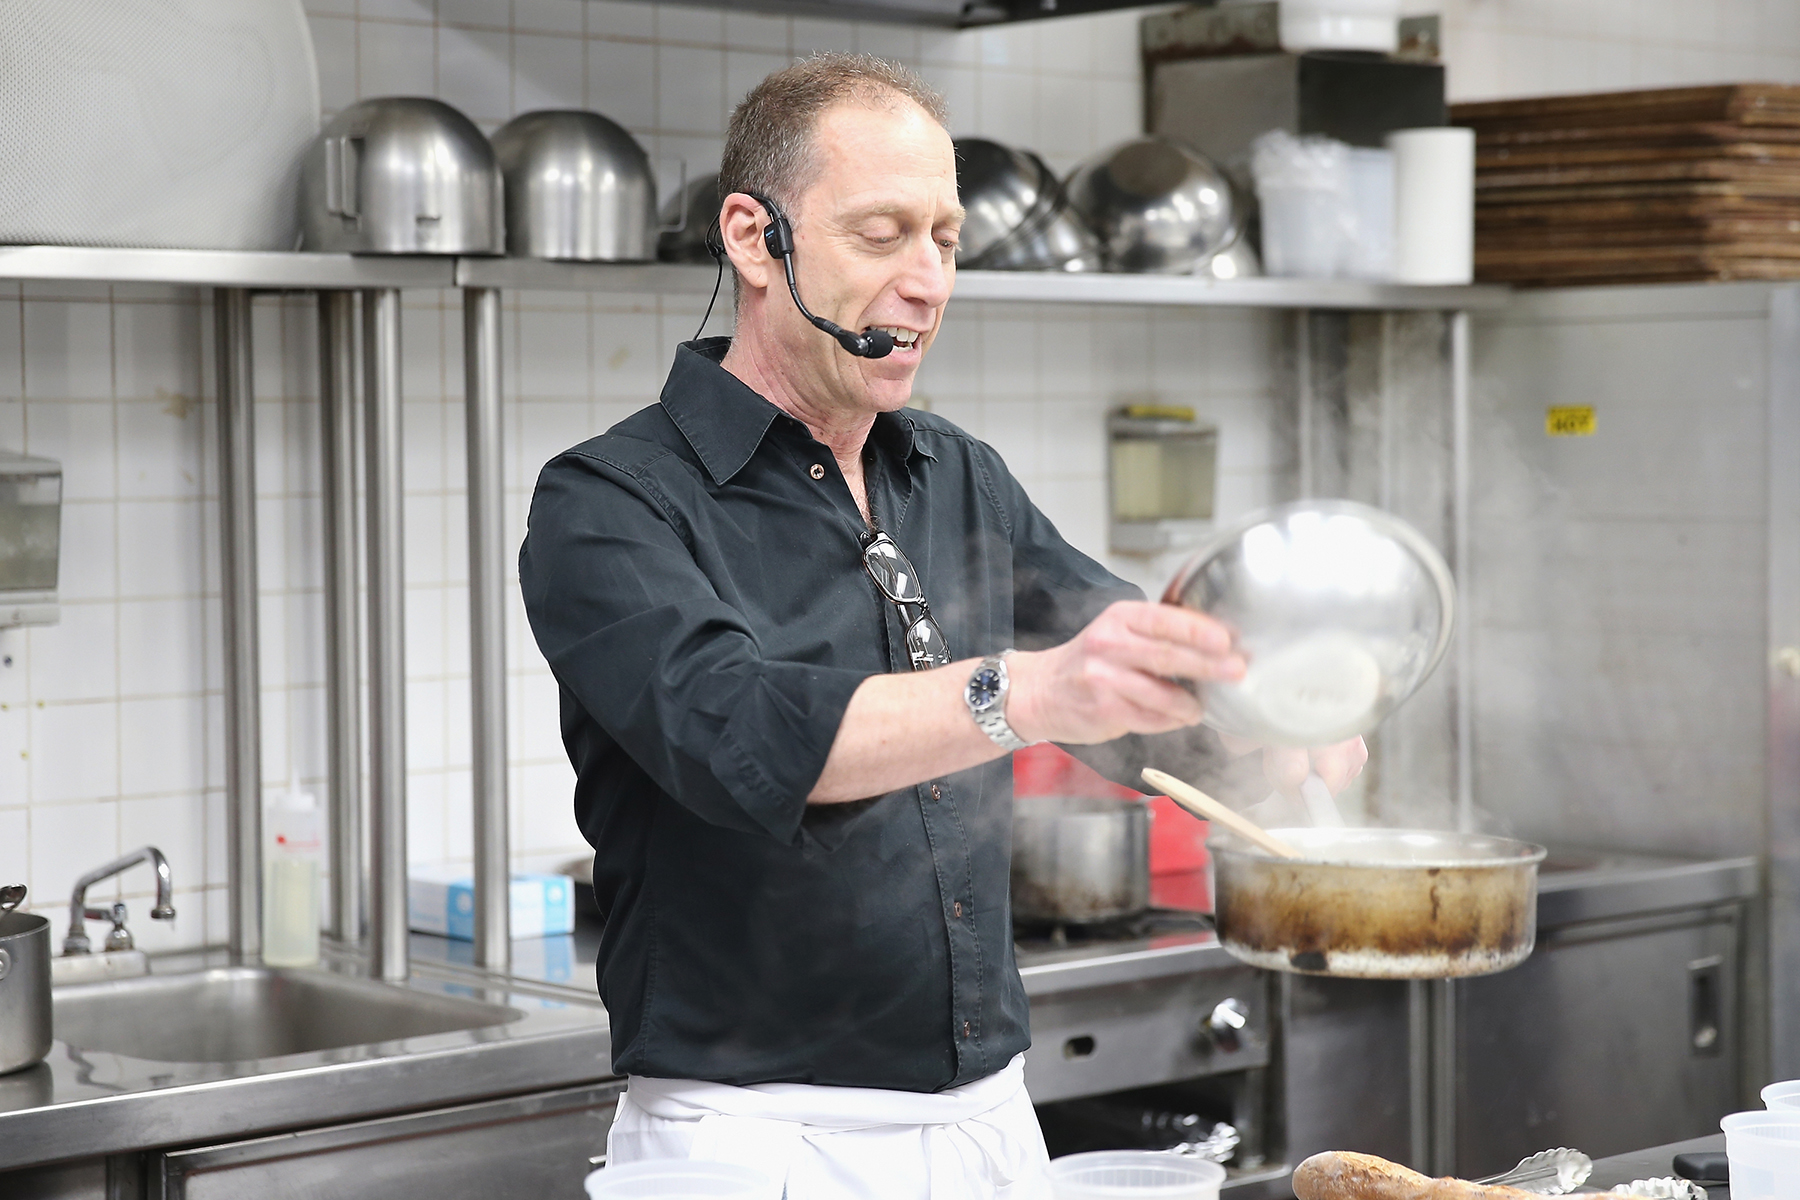 Chef David Lebovitz speaks at the the New York Culinary Experience in 2015